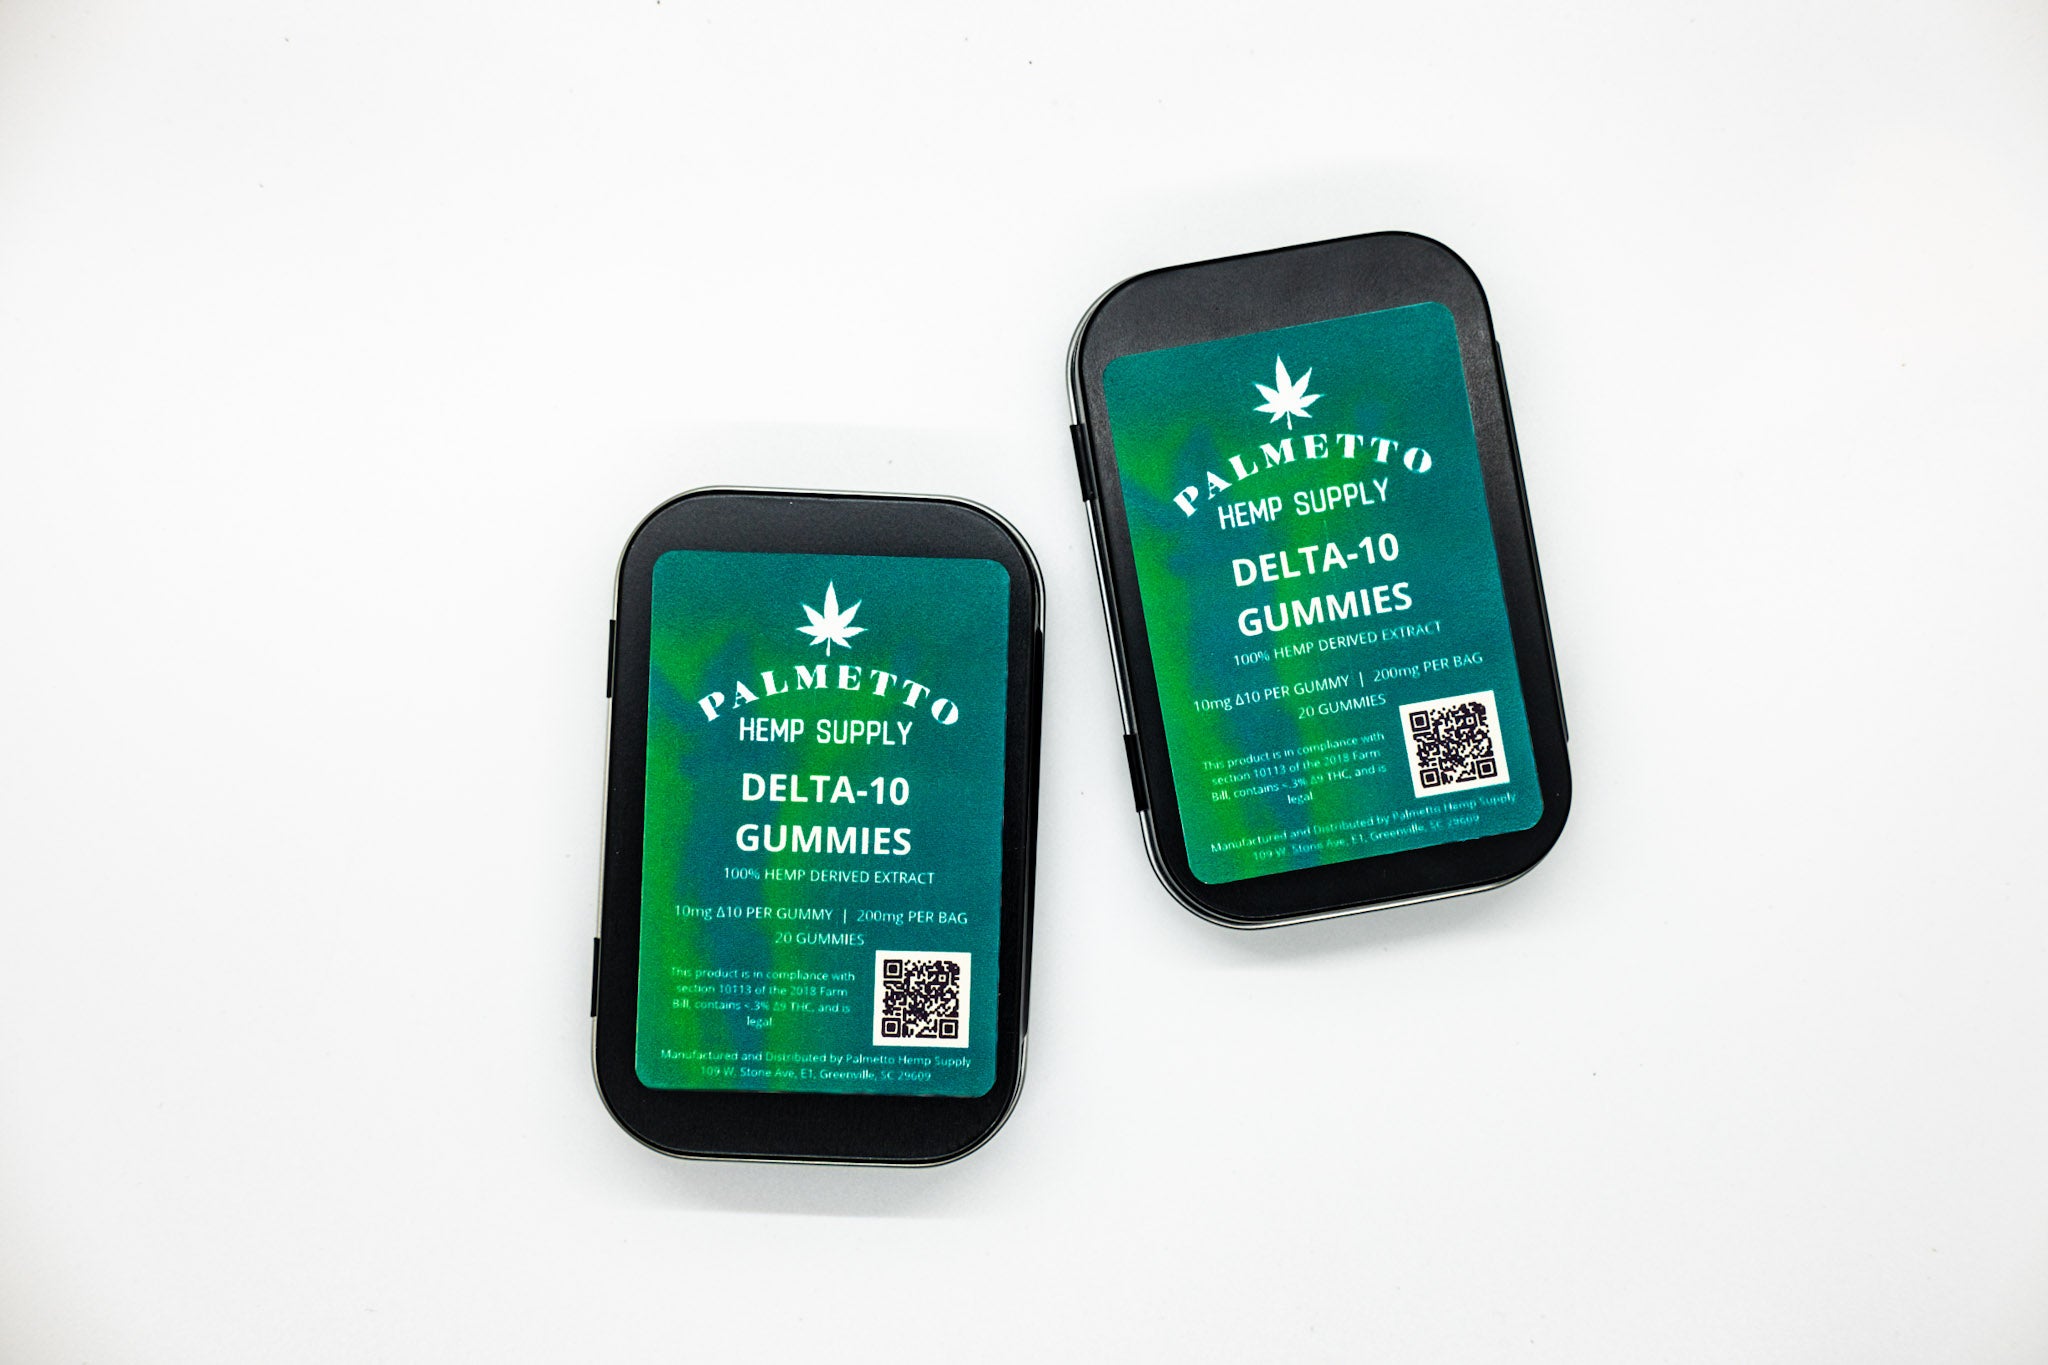 Two Delta-10 gummies in a black metal tin with blue green gradient label on the front on a white background.